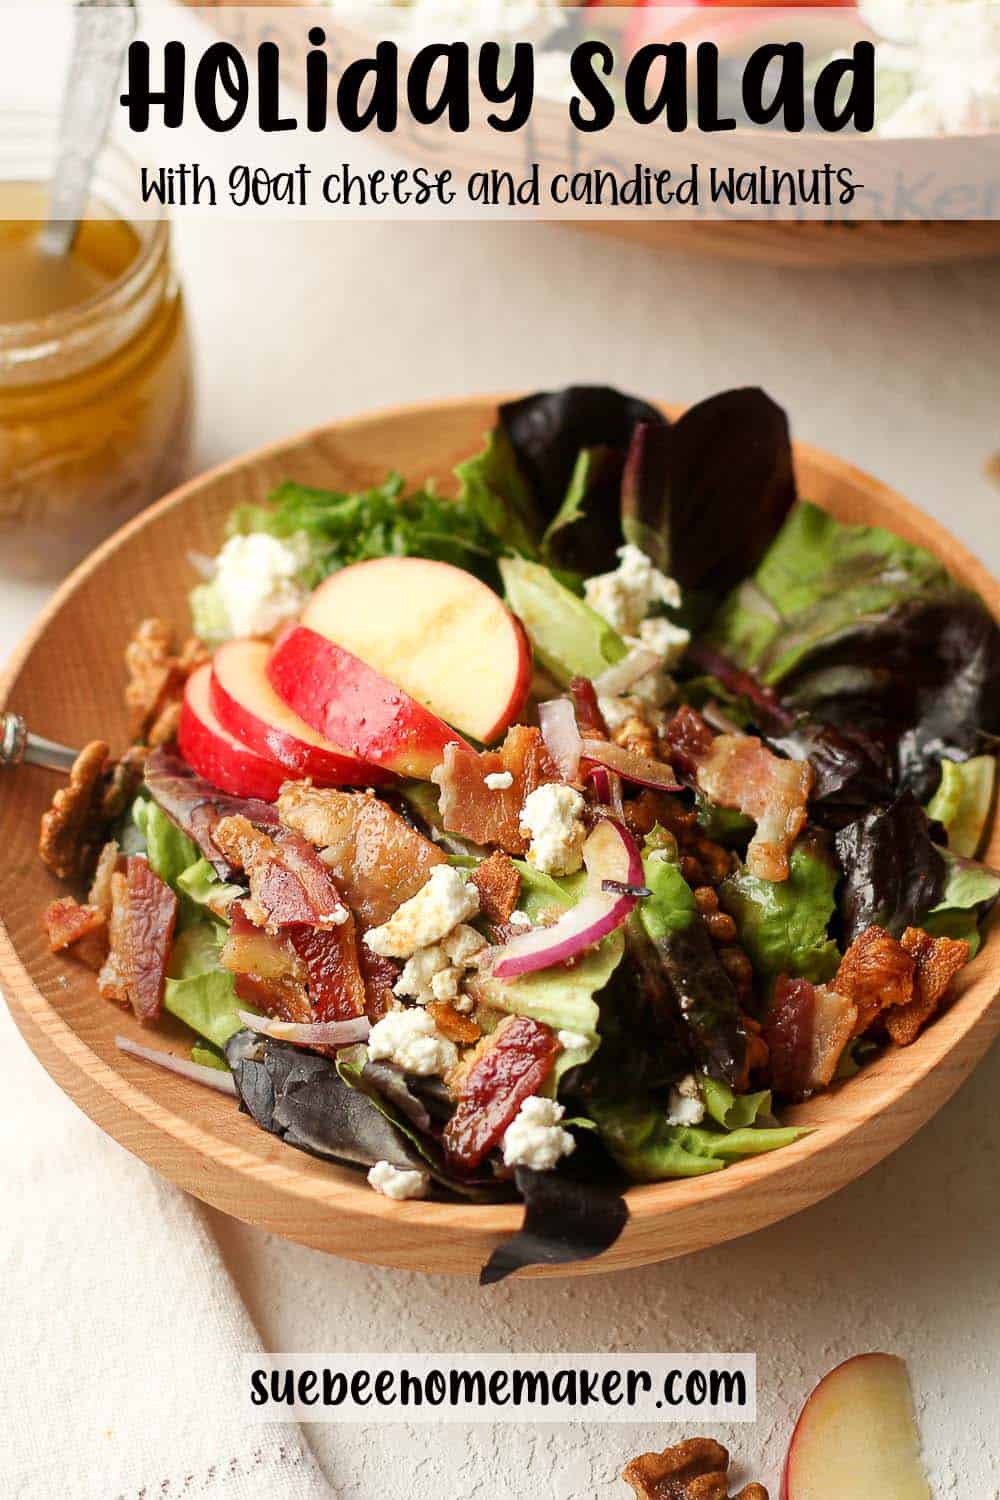 A serving of a holiday salad with goat cheese, apples, and candied walnuts.